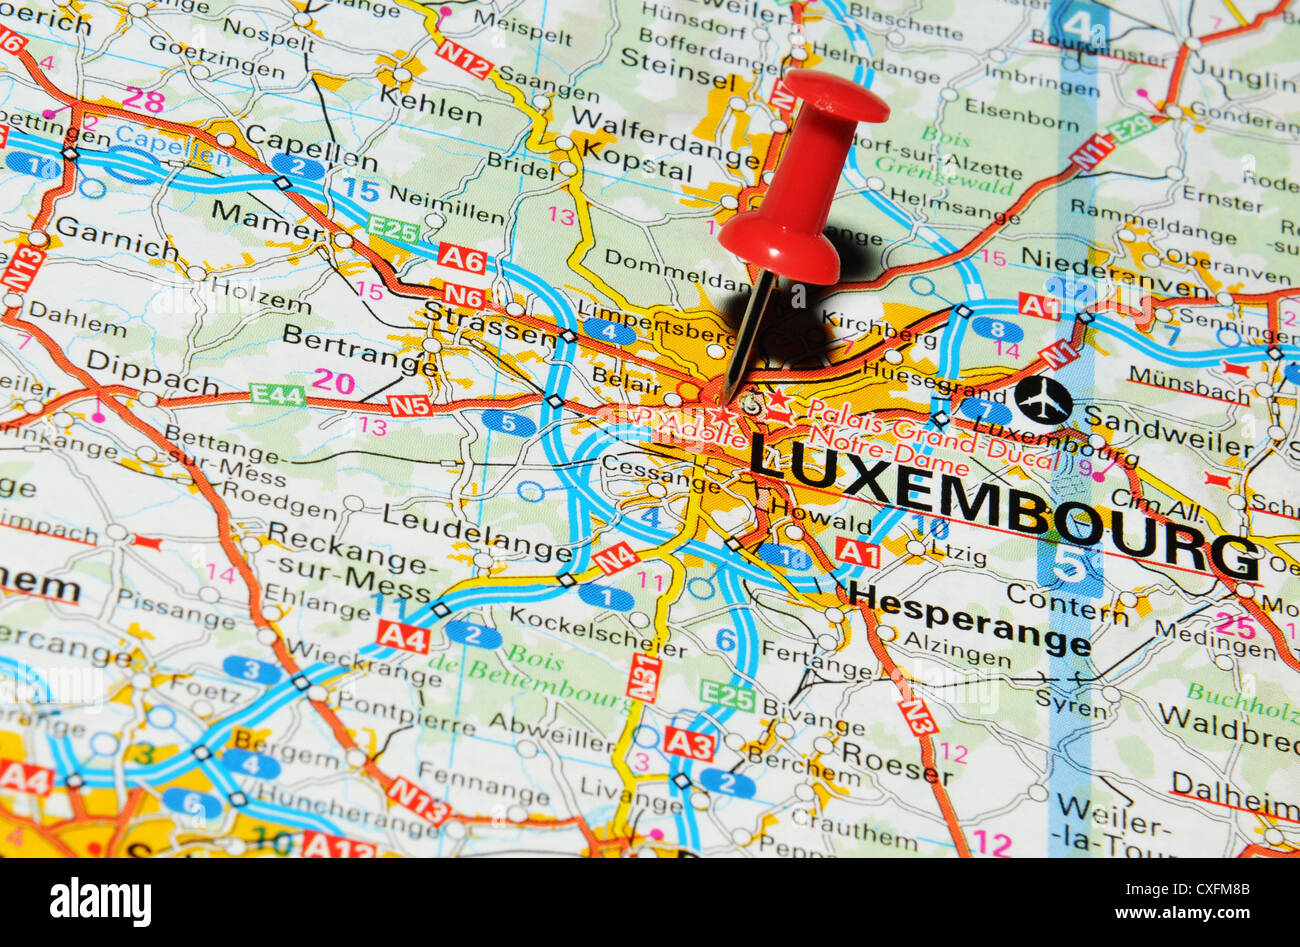 Luxembourg on world map Stock Photo